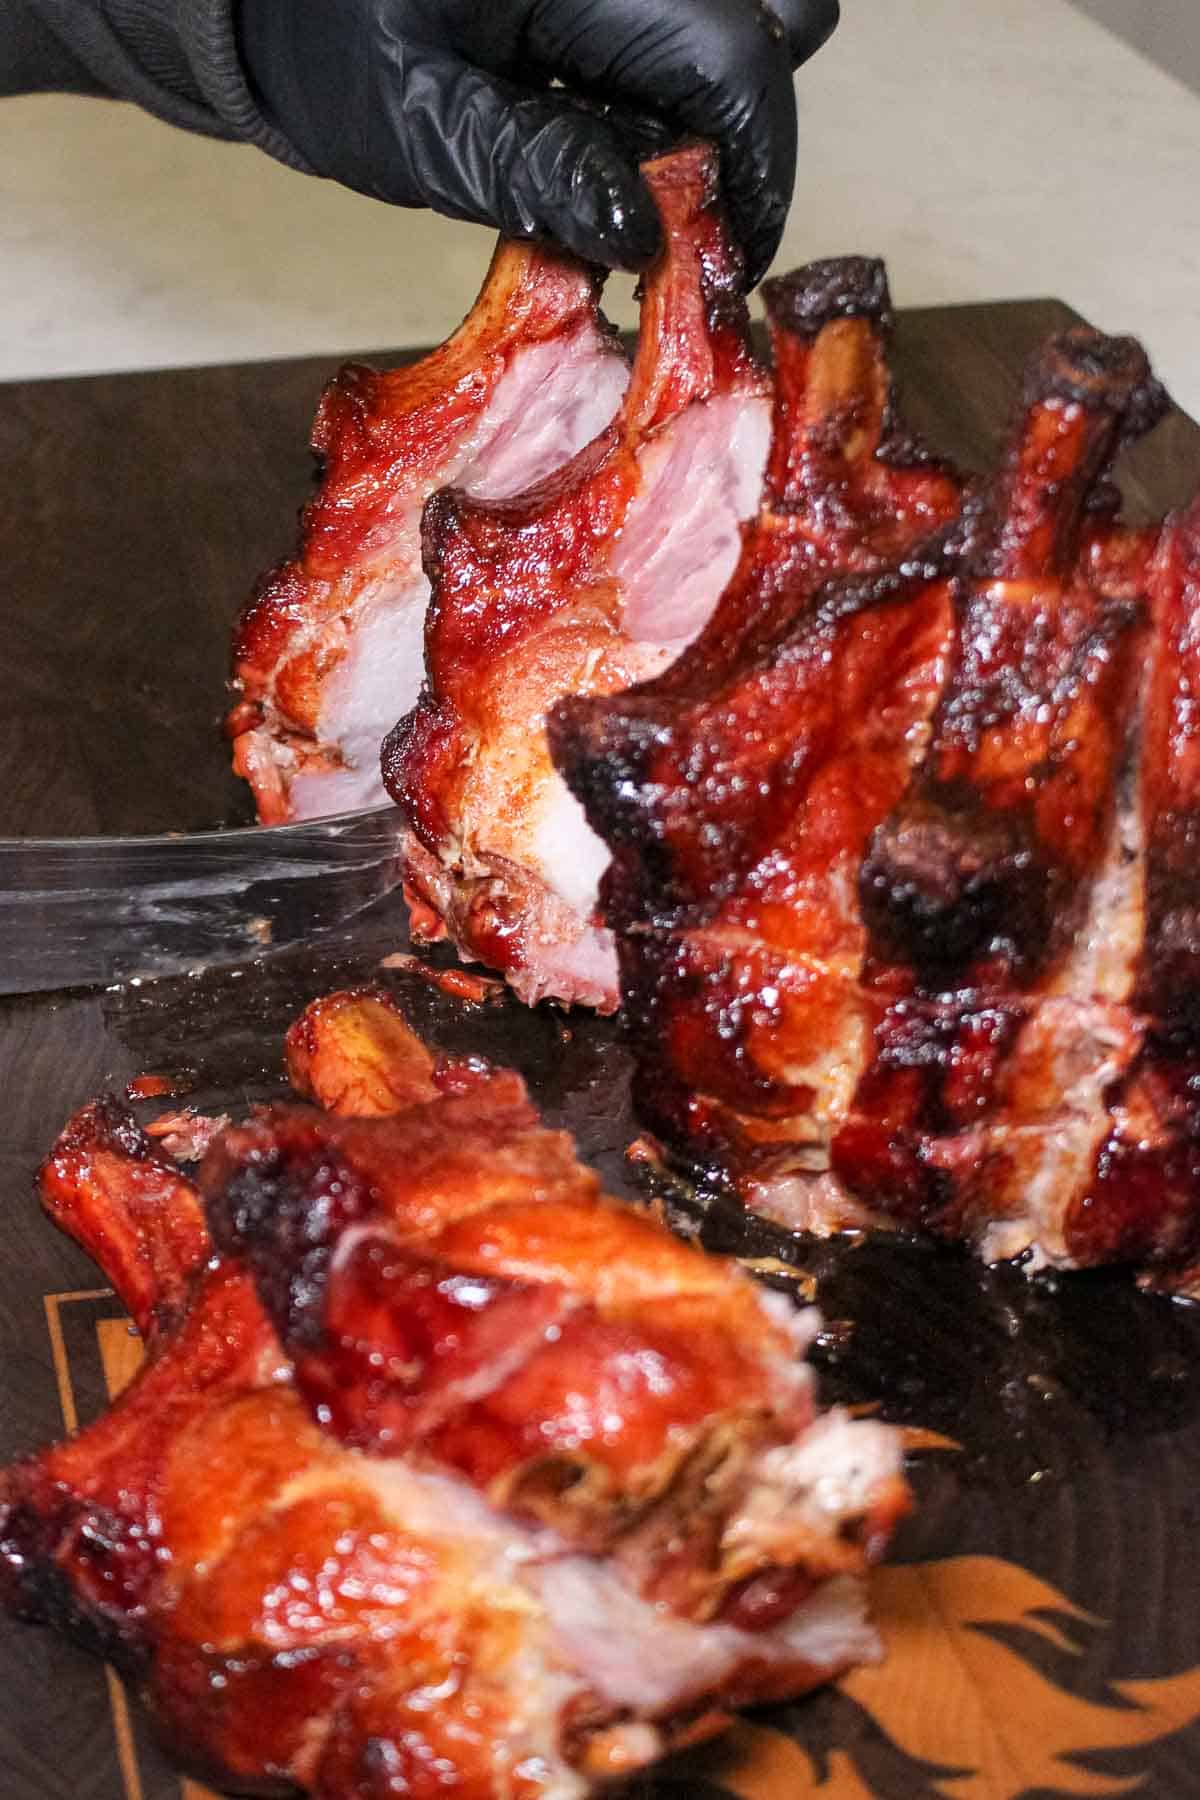 Slicing into the Smoked Pork Crown Roast and getting ready to serve. 